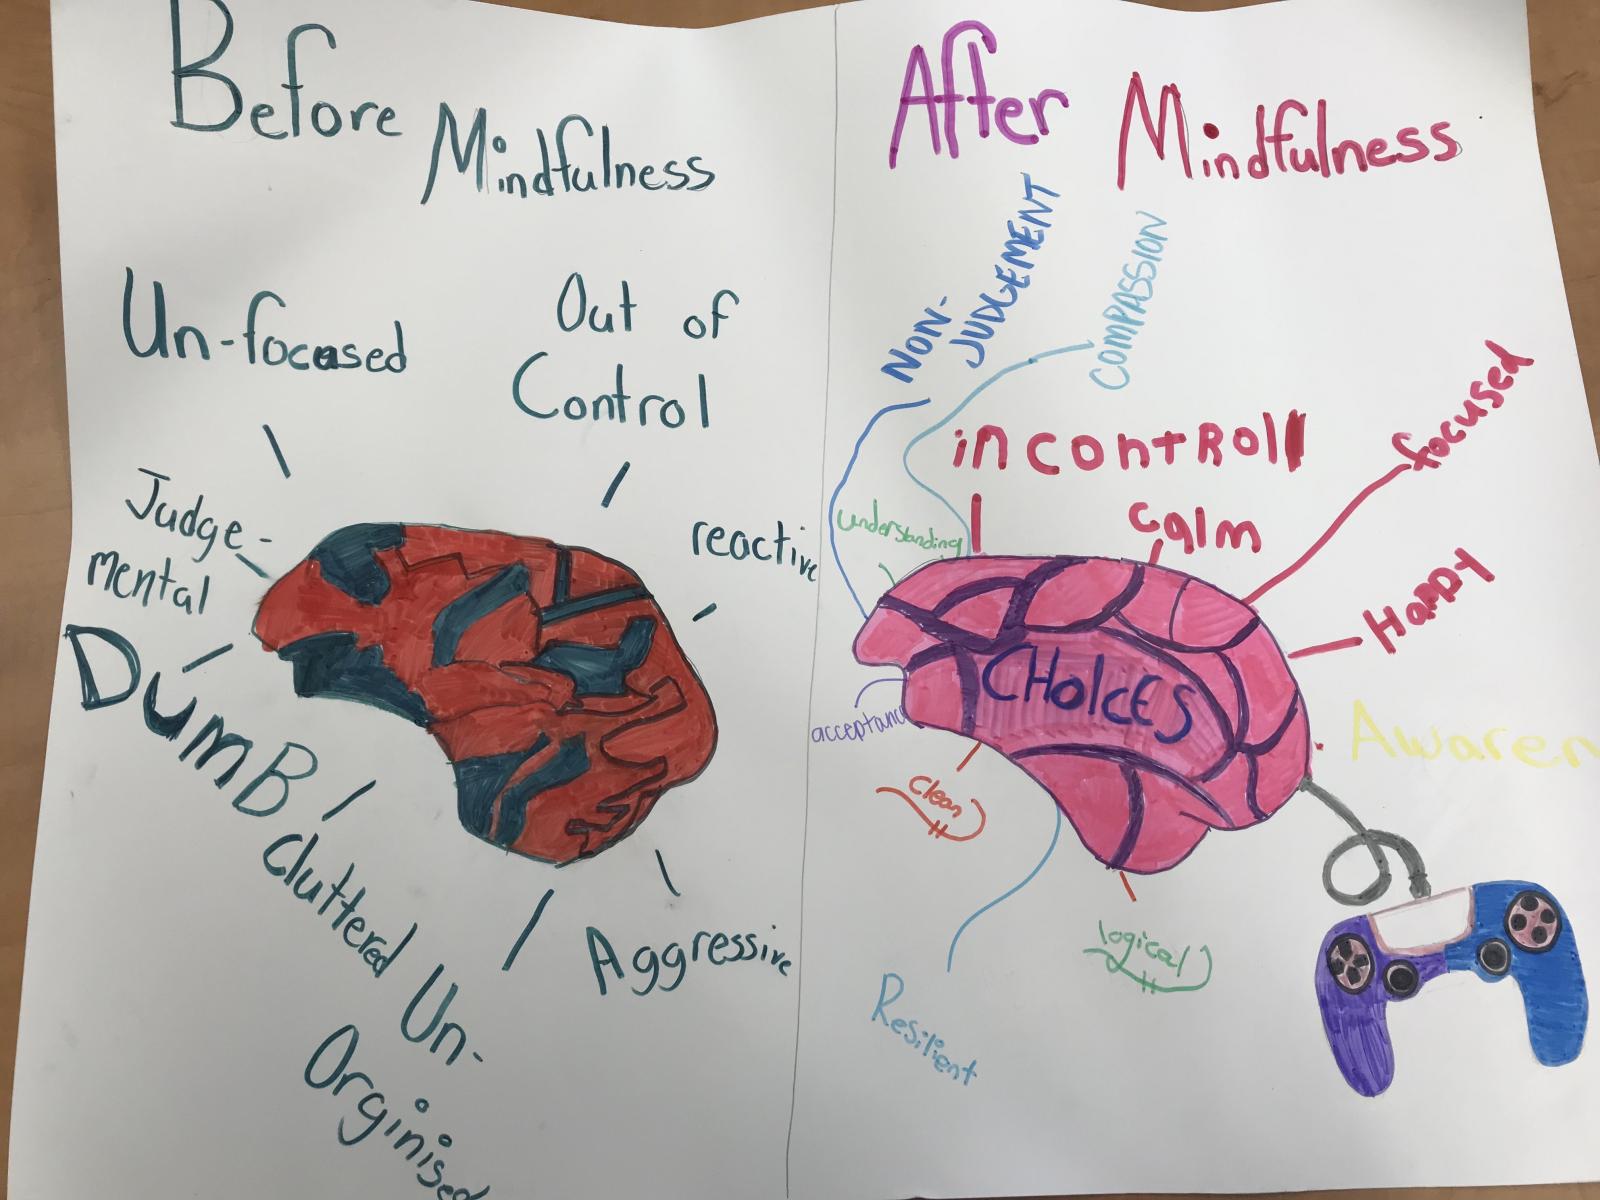 Drawing of two brains before and after mindfulness